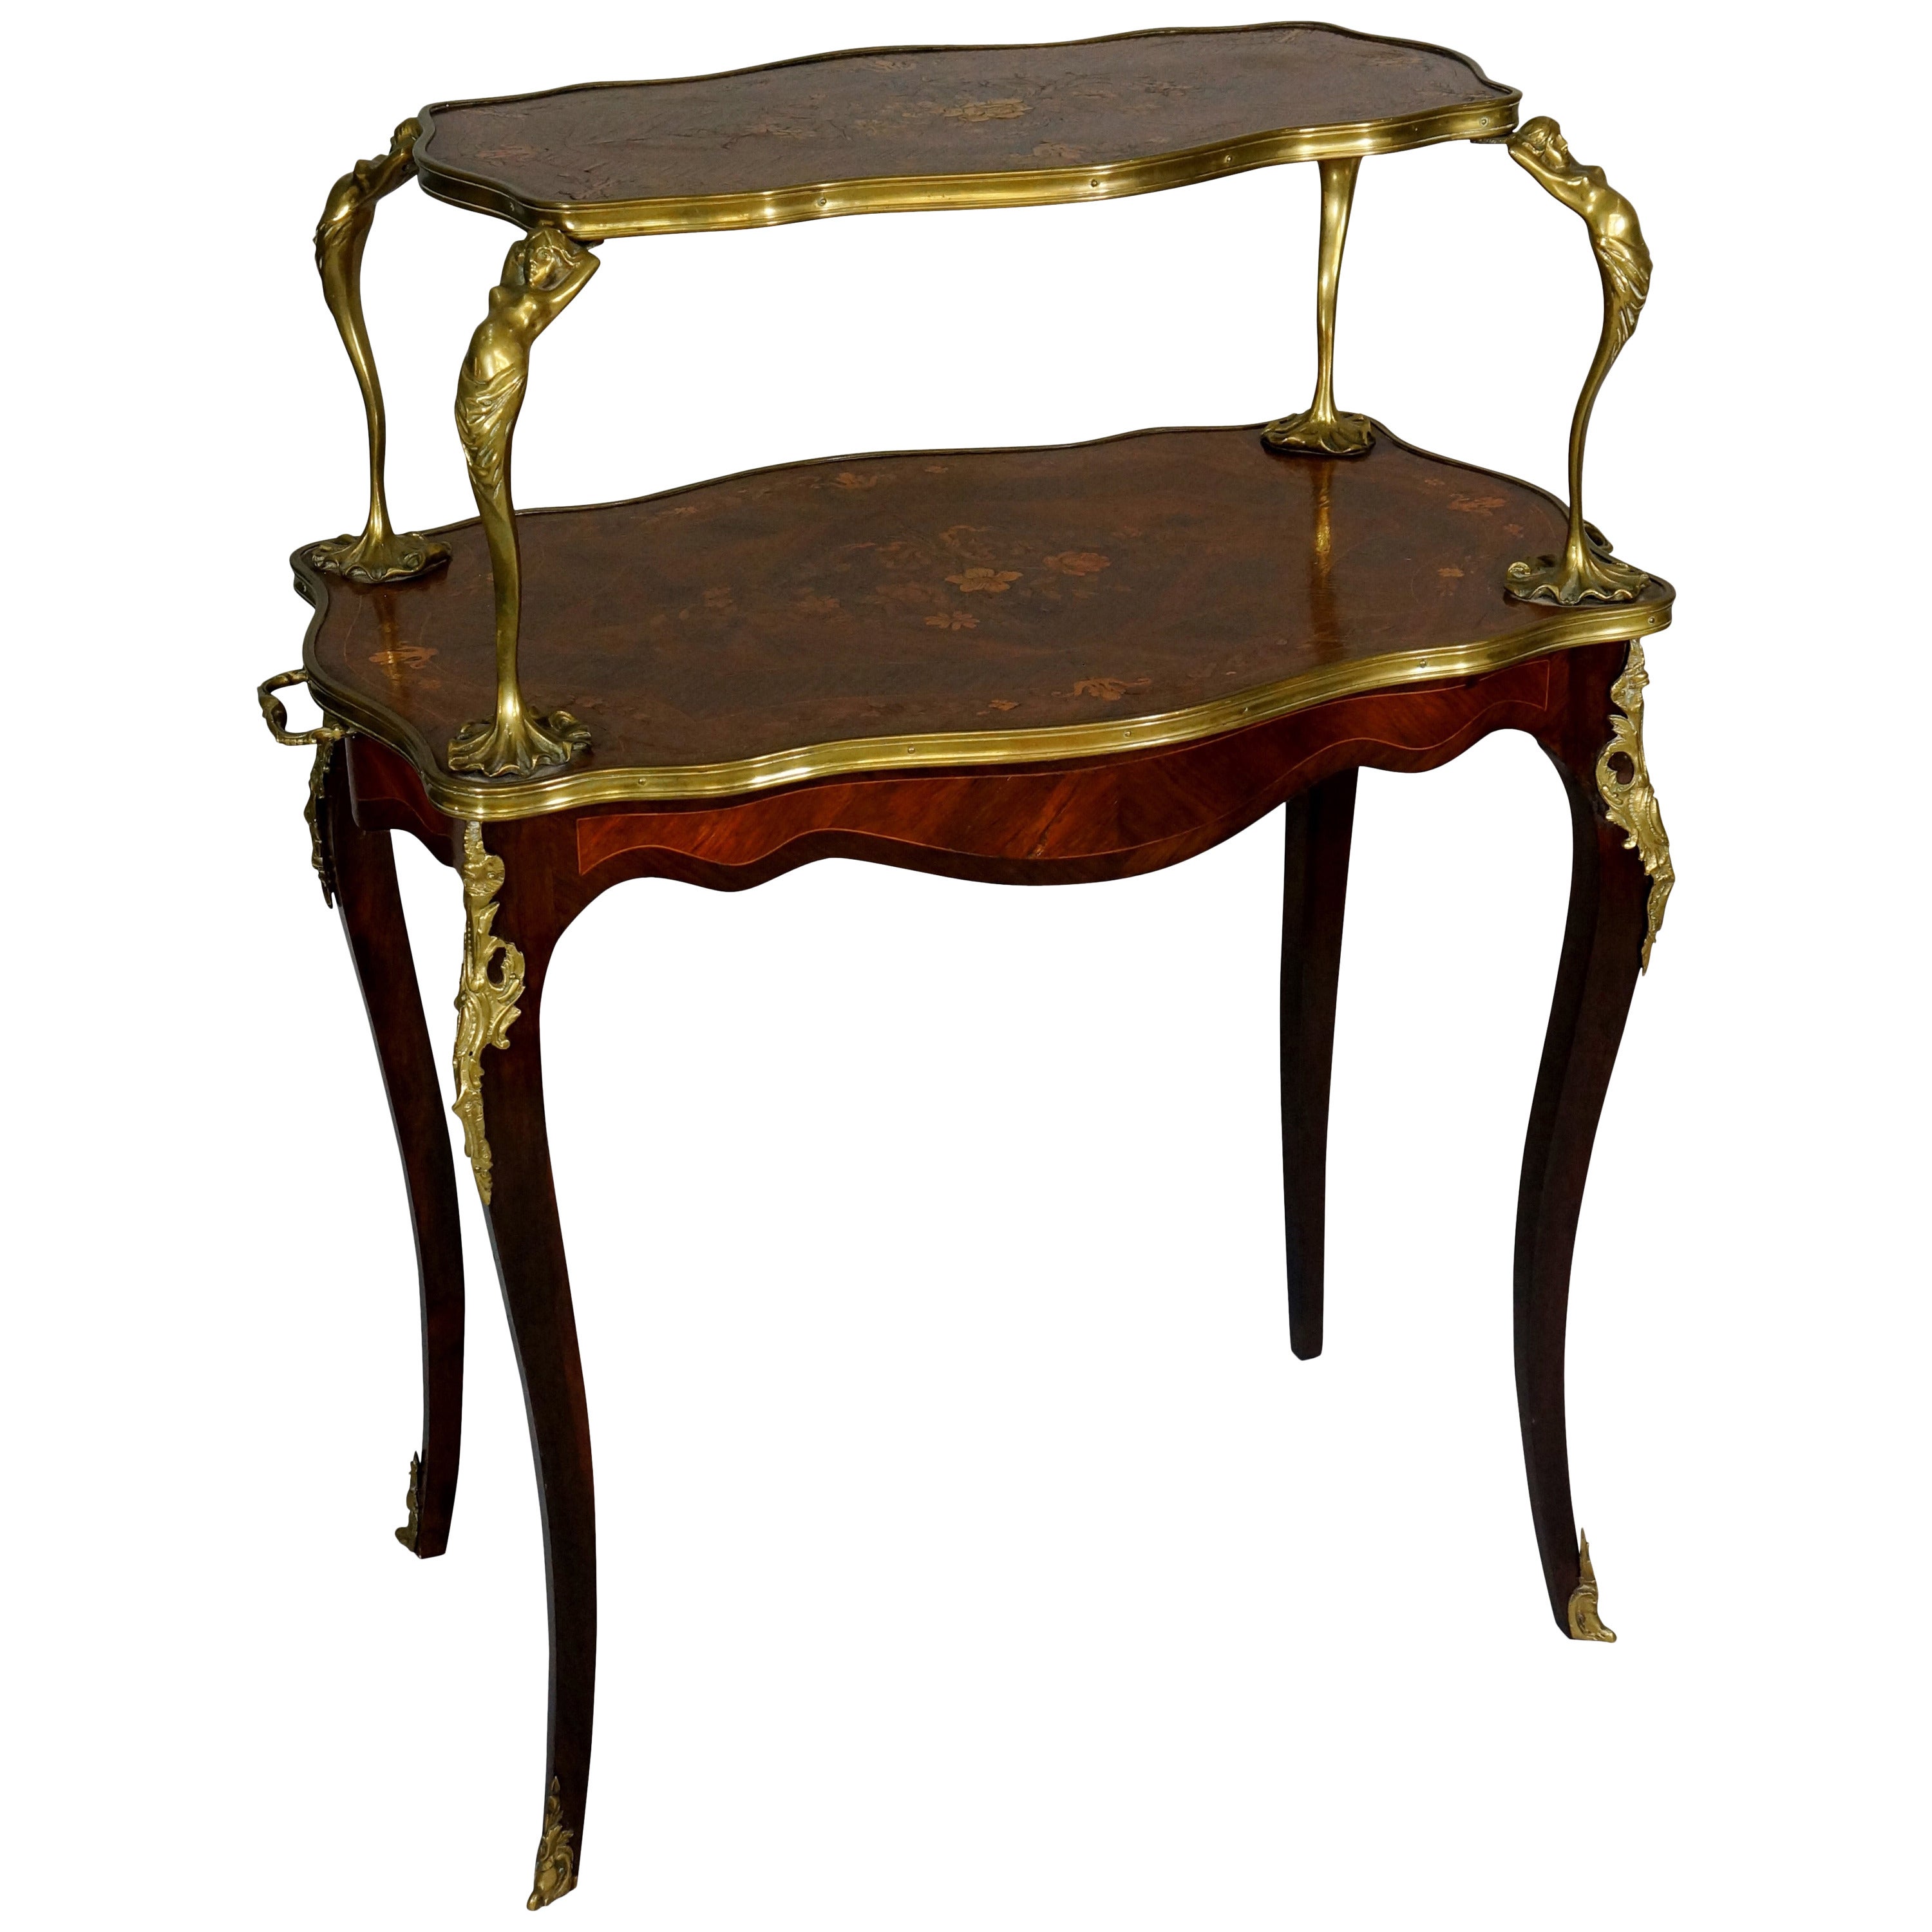 A fine Louis XV style ormolu mounted marquetry two-tier table